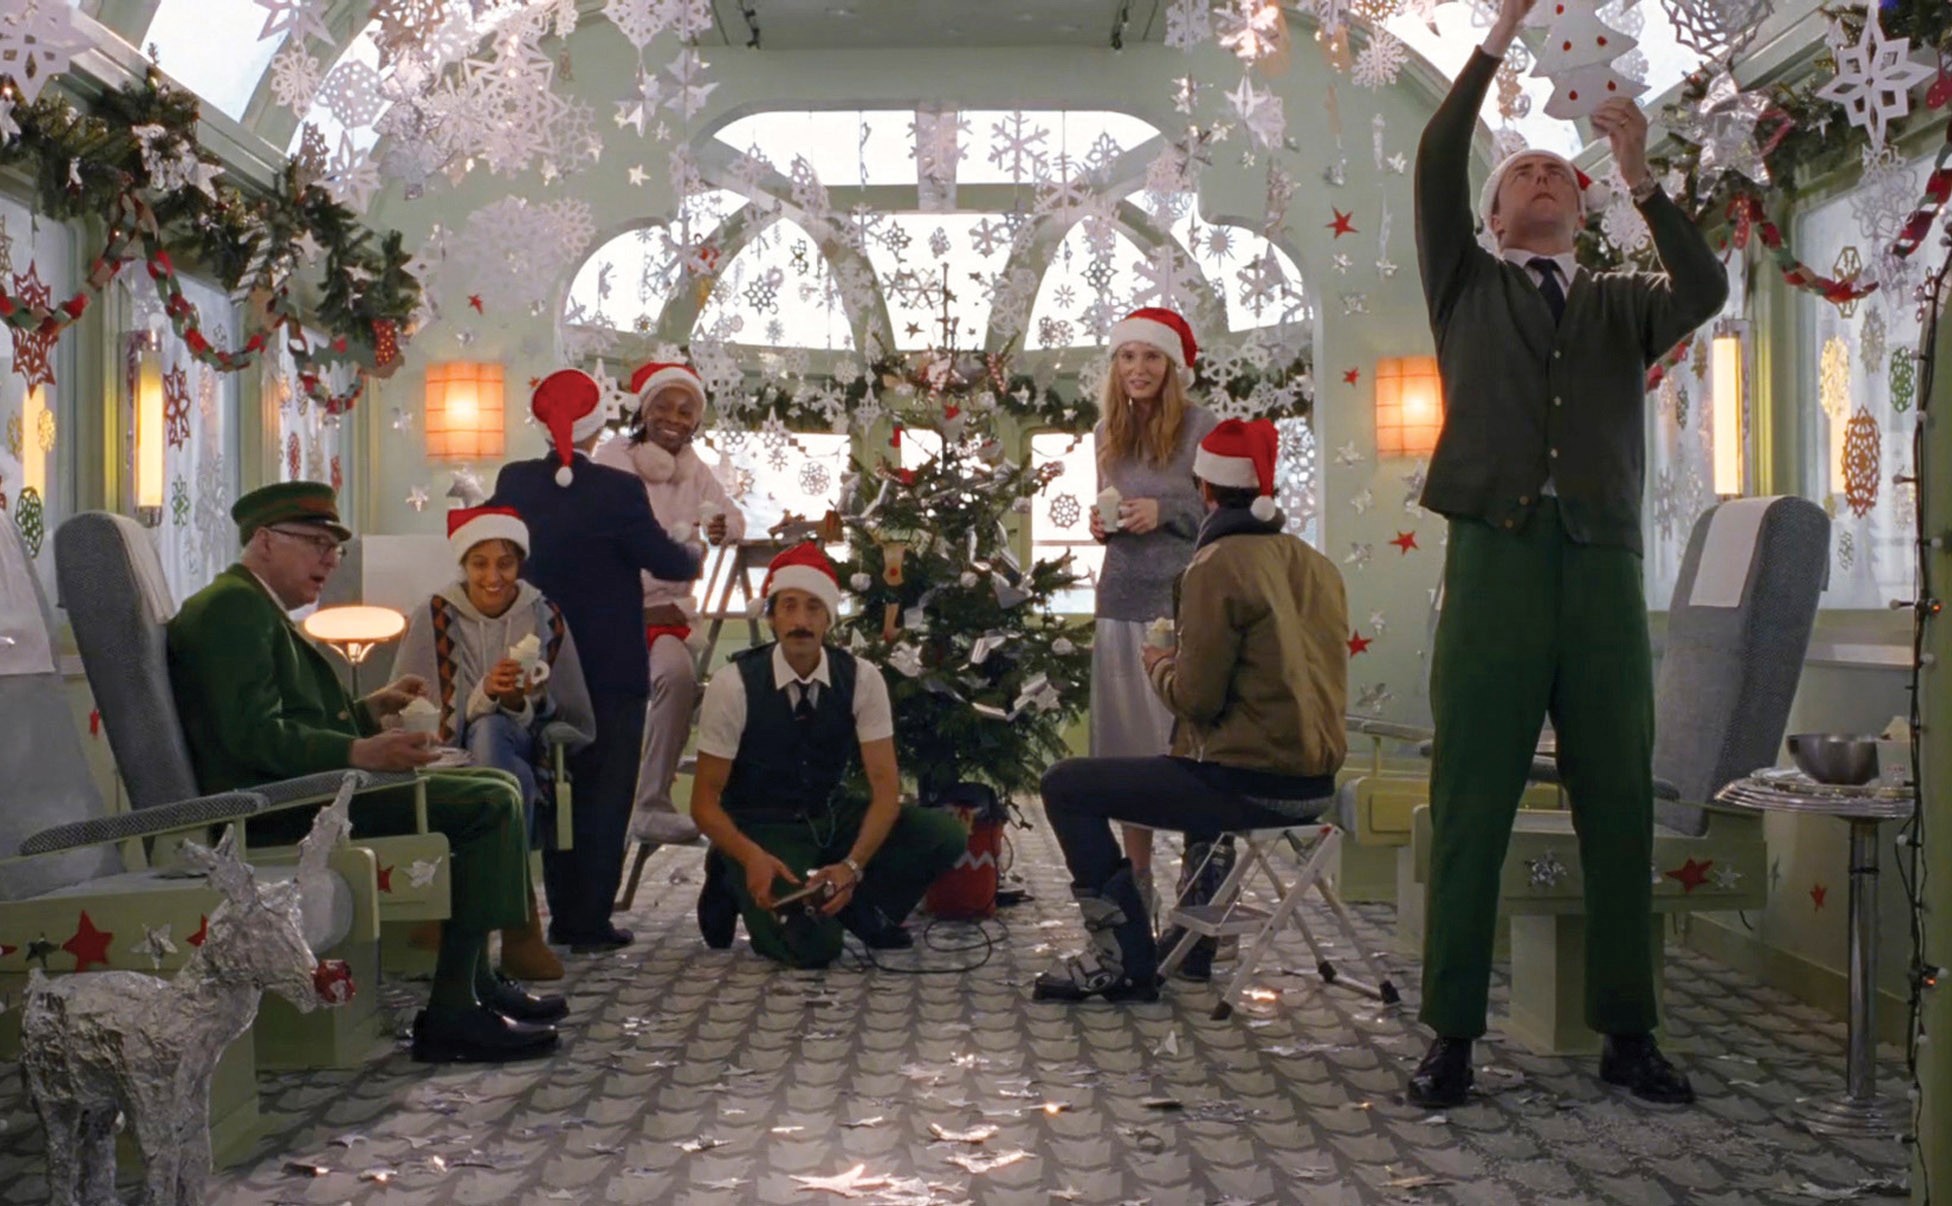 h&m, hm, holiday campaign, wes anderson, adrian brody